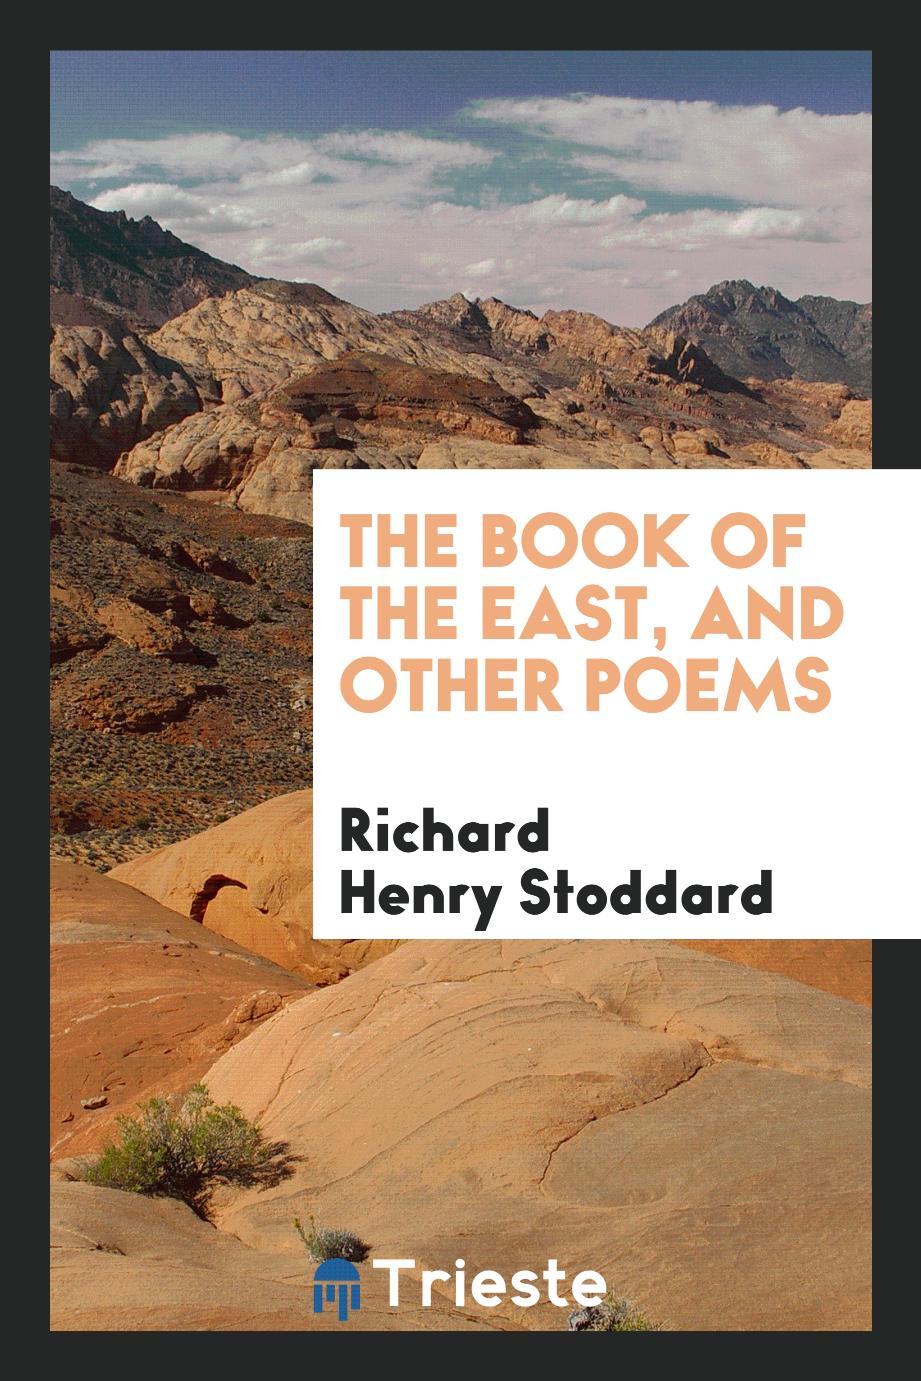 The Book of the East, and Other Poems